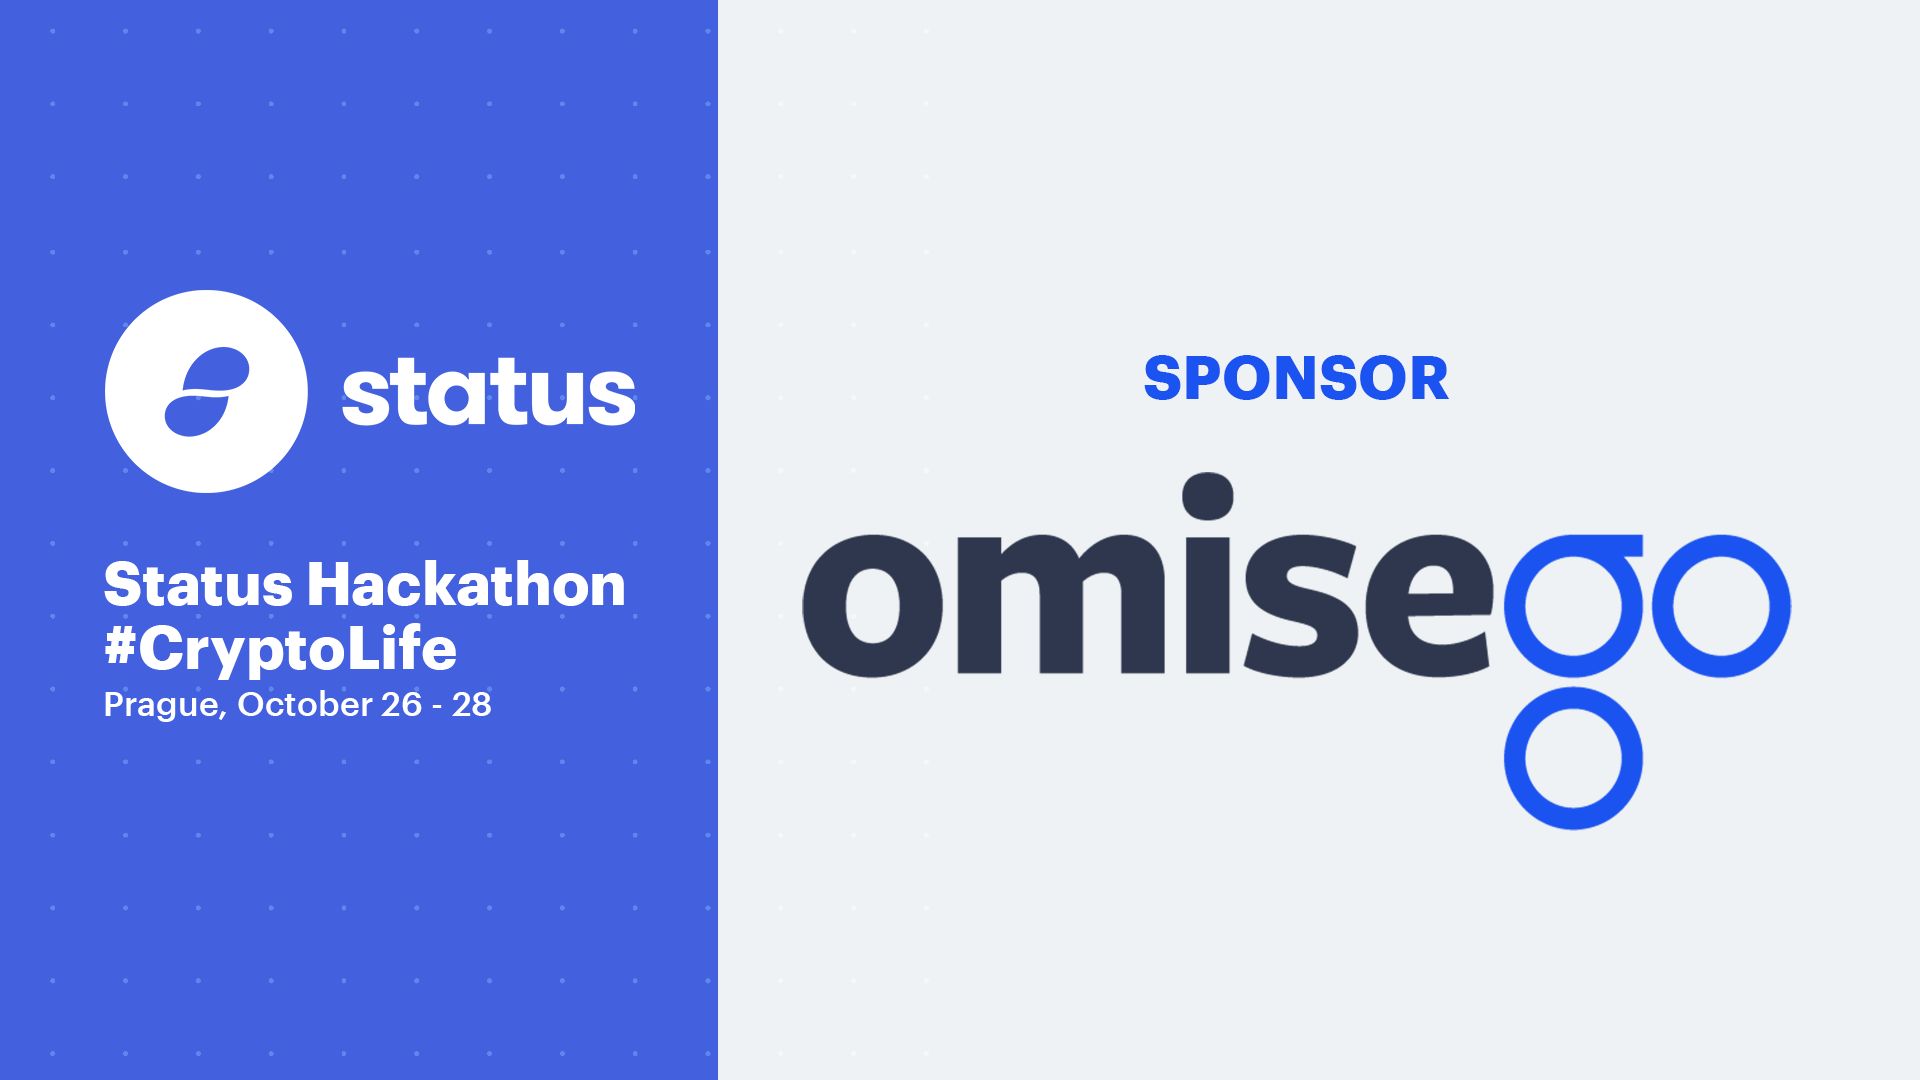 Announcing OmiseGo as sponsor for the Status Hackathon – #CryptoLife